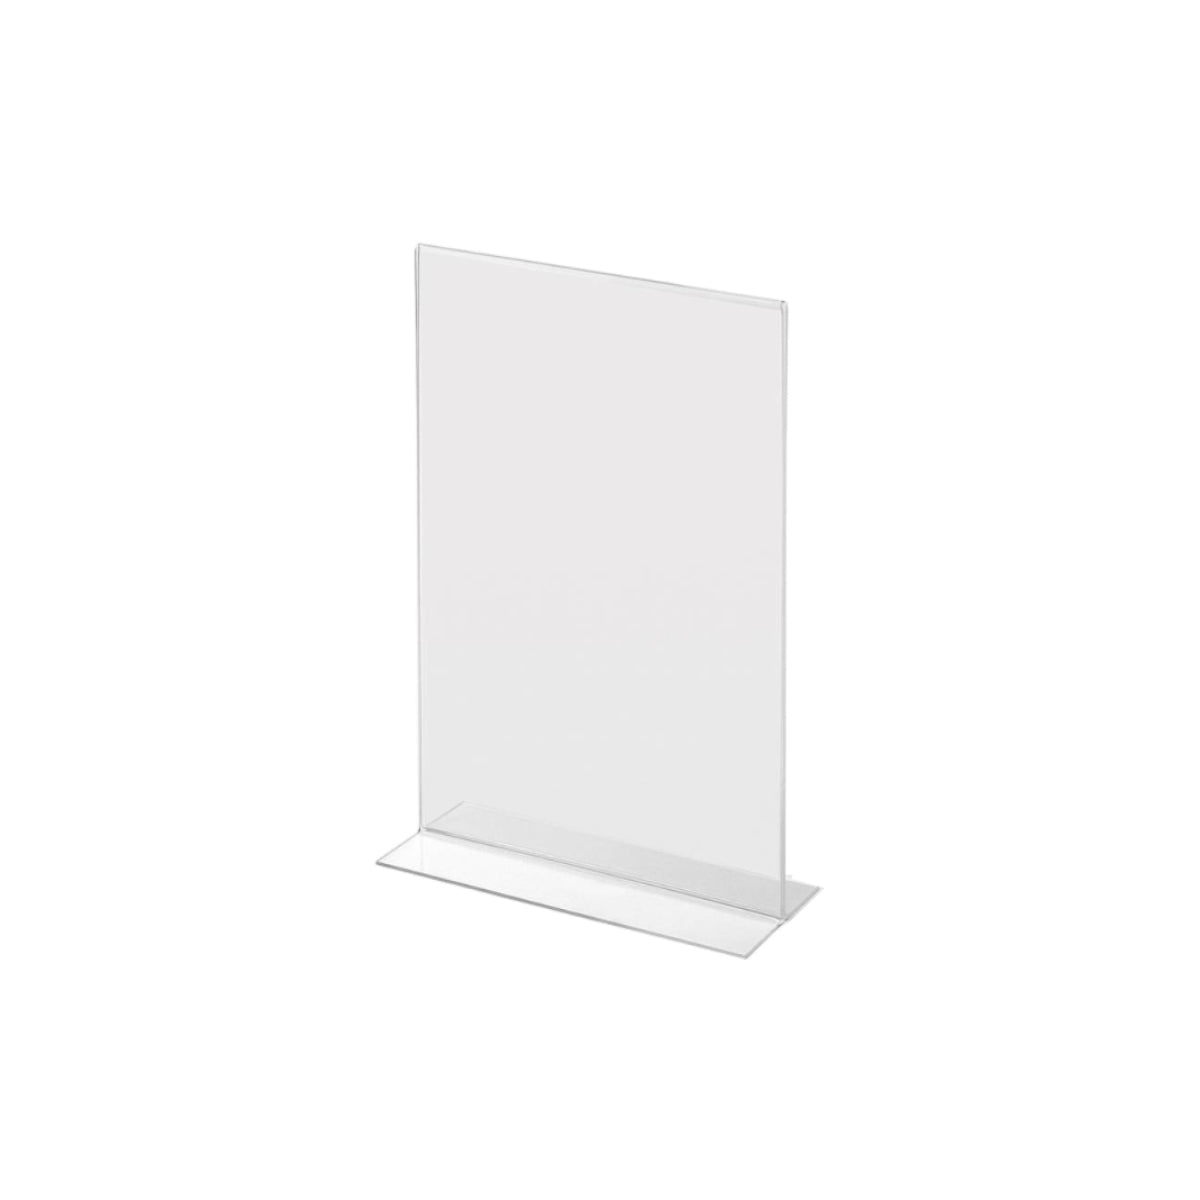 Acrylic Sign Holder 2 Sided T-Type, DL, 100 x 210 mm x 3mm Thickness